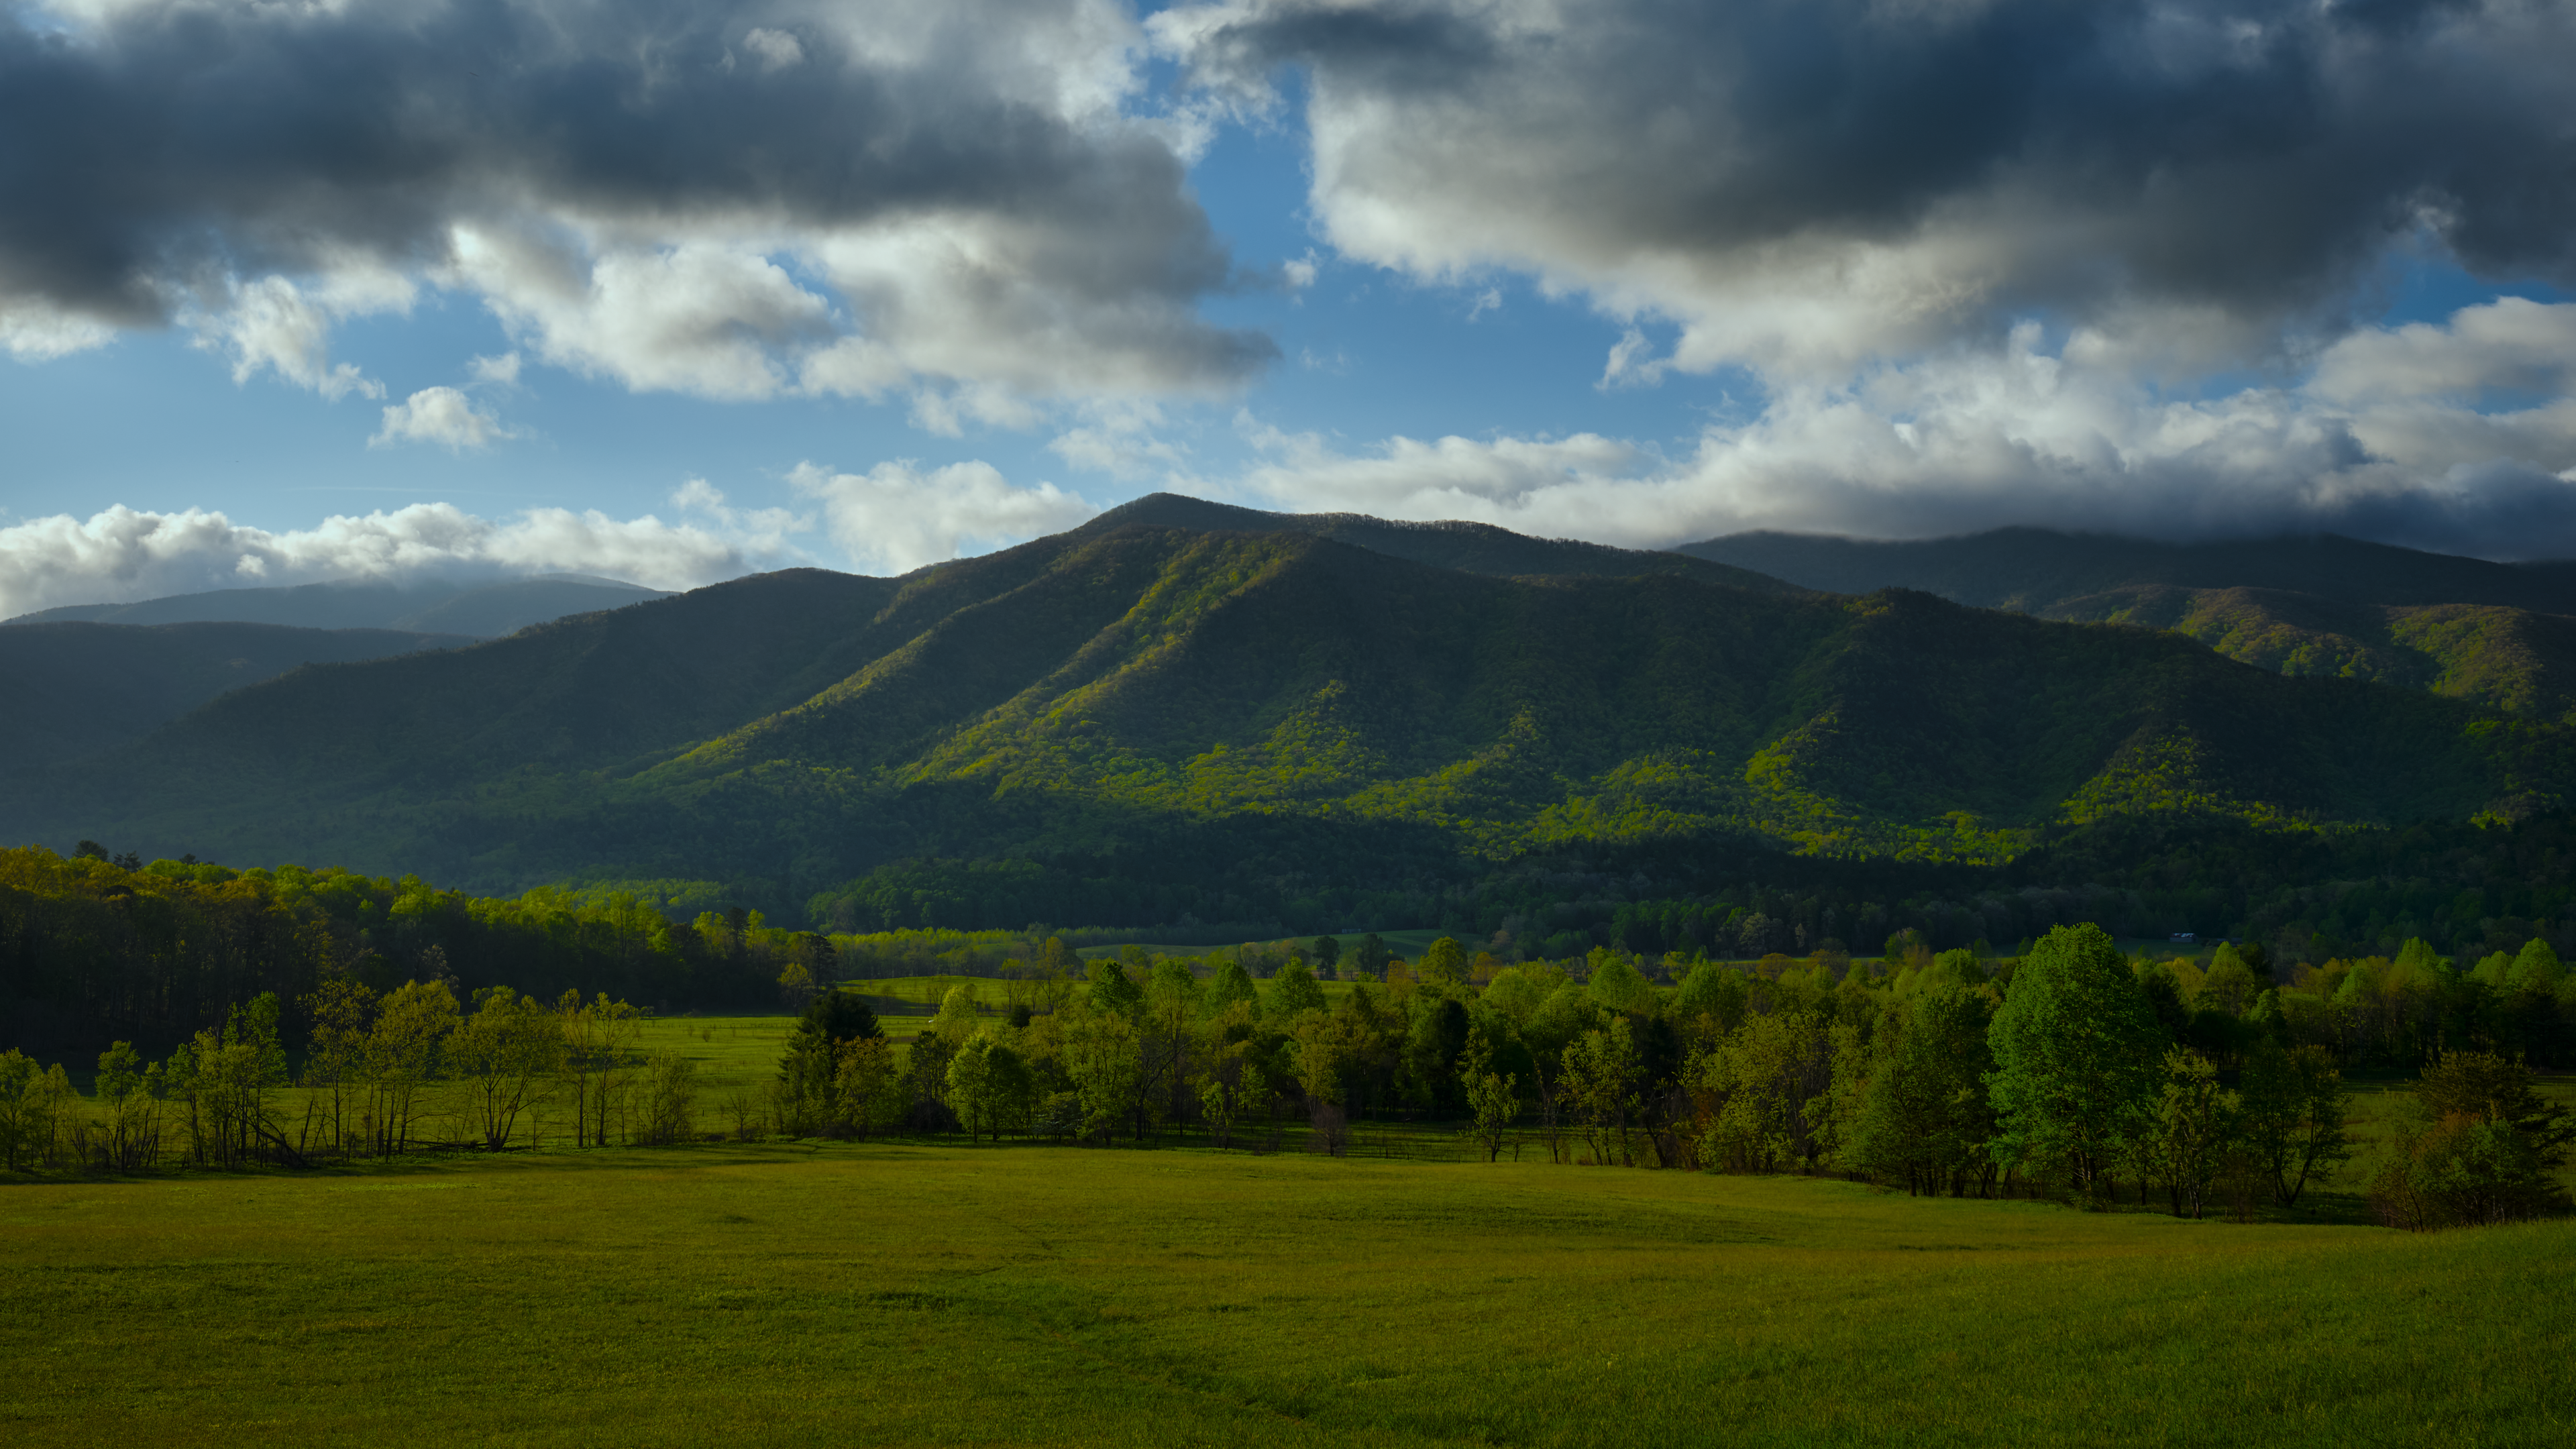 General 3840x2160 nature landscape trees grass forest mountains clouds sky field Great Smoky Mountains Smoky Mountains USA